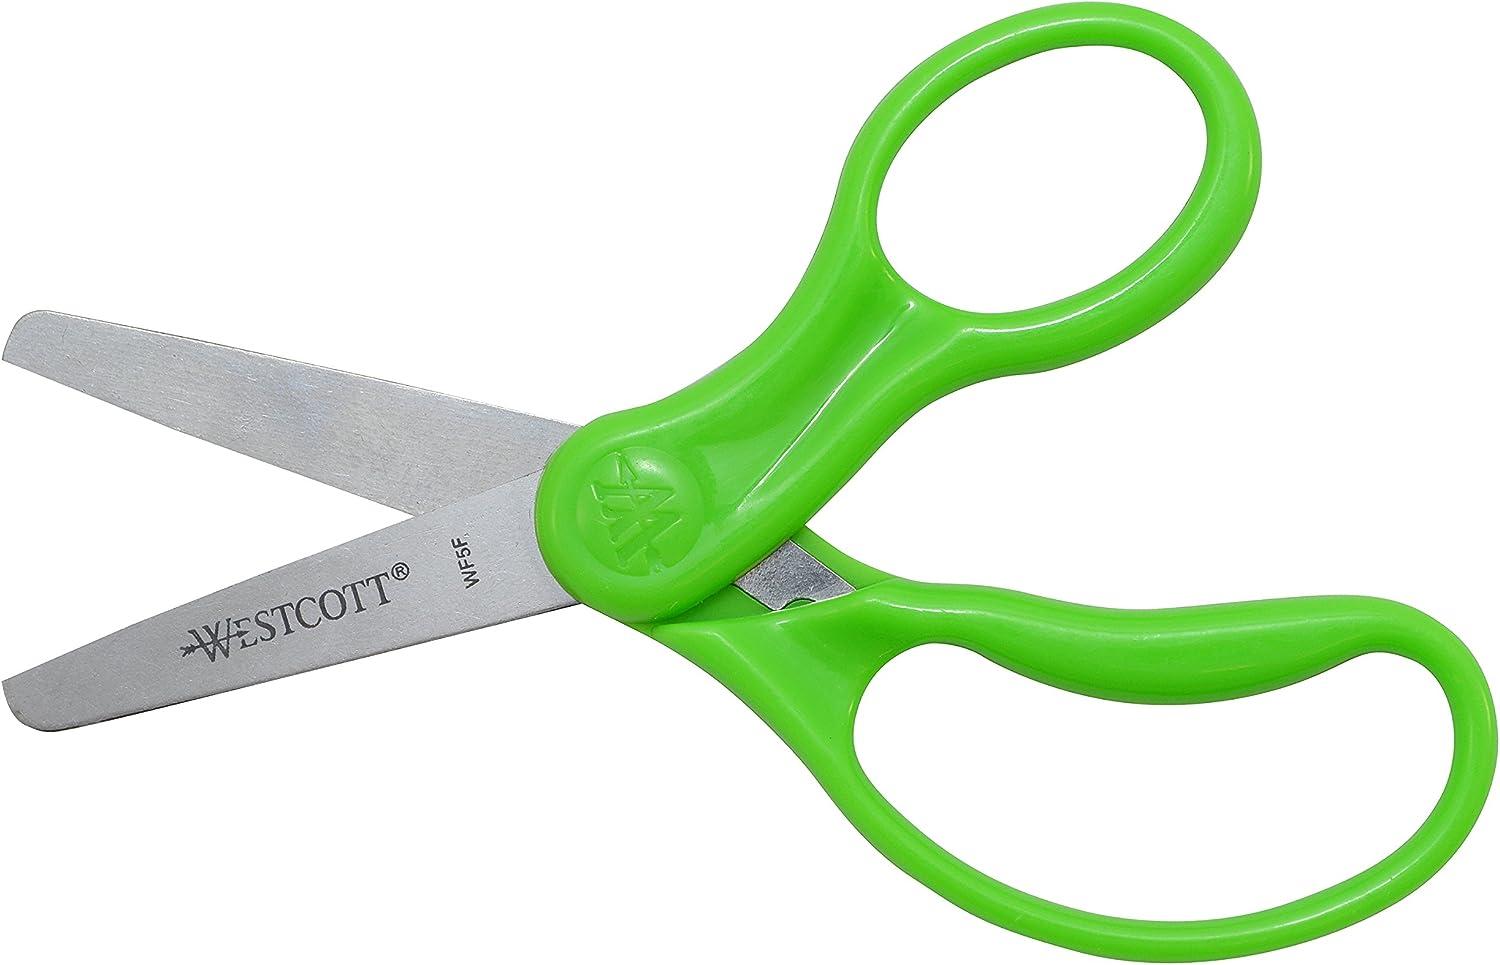 Westcott 16454 Right- and Left-Handed Scissors, Kids' Scissors, Ages 4-8,  5-Inch Blunt Tip, Assorted, 6 Pack